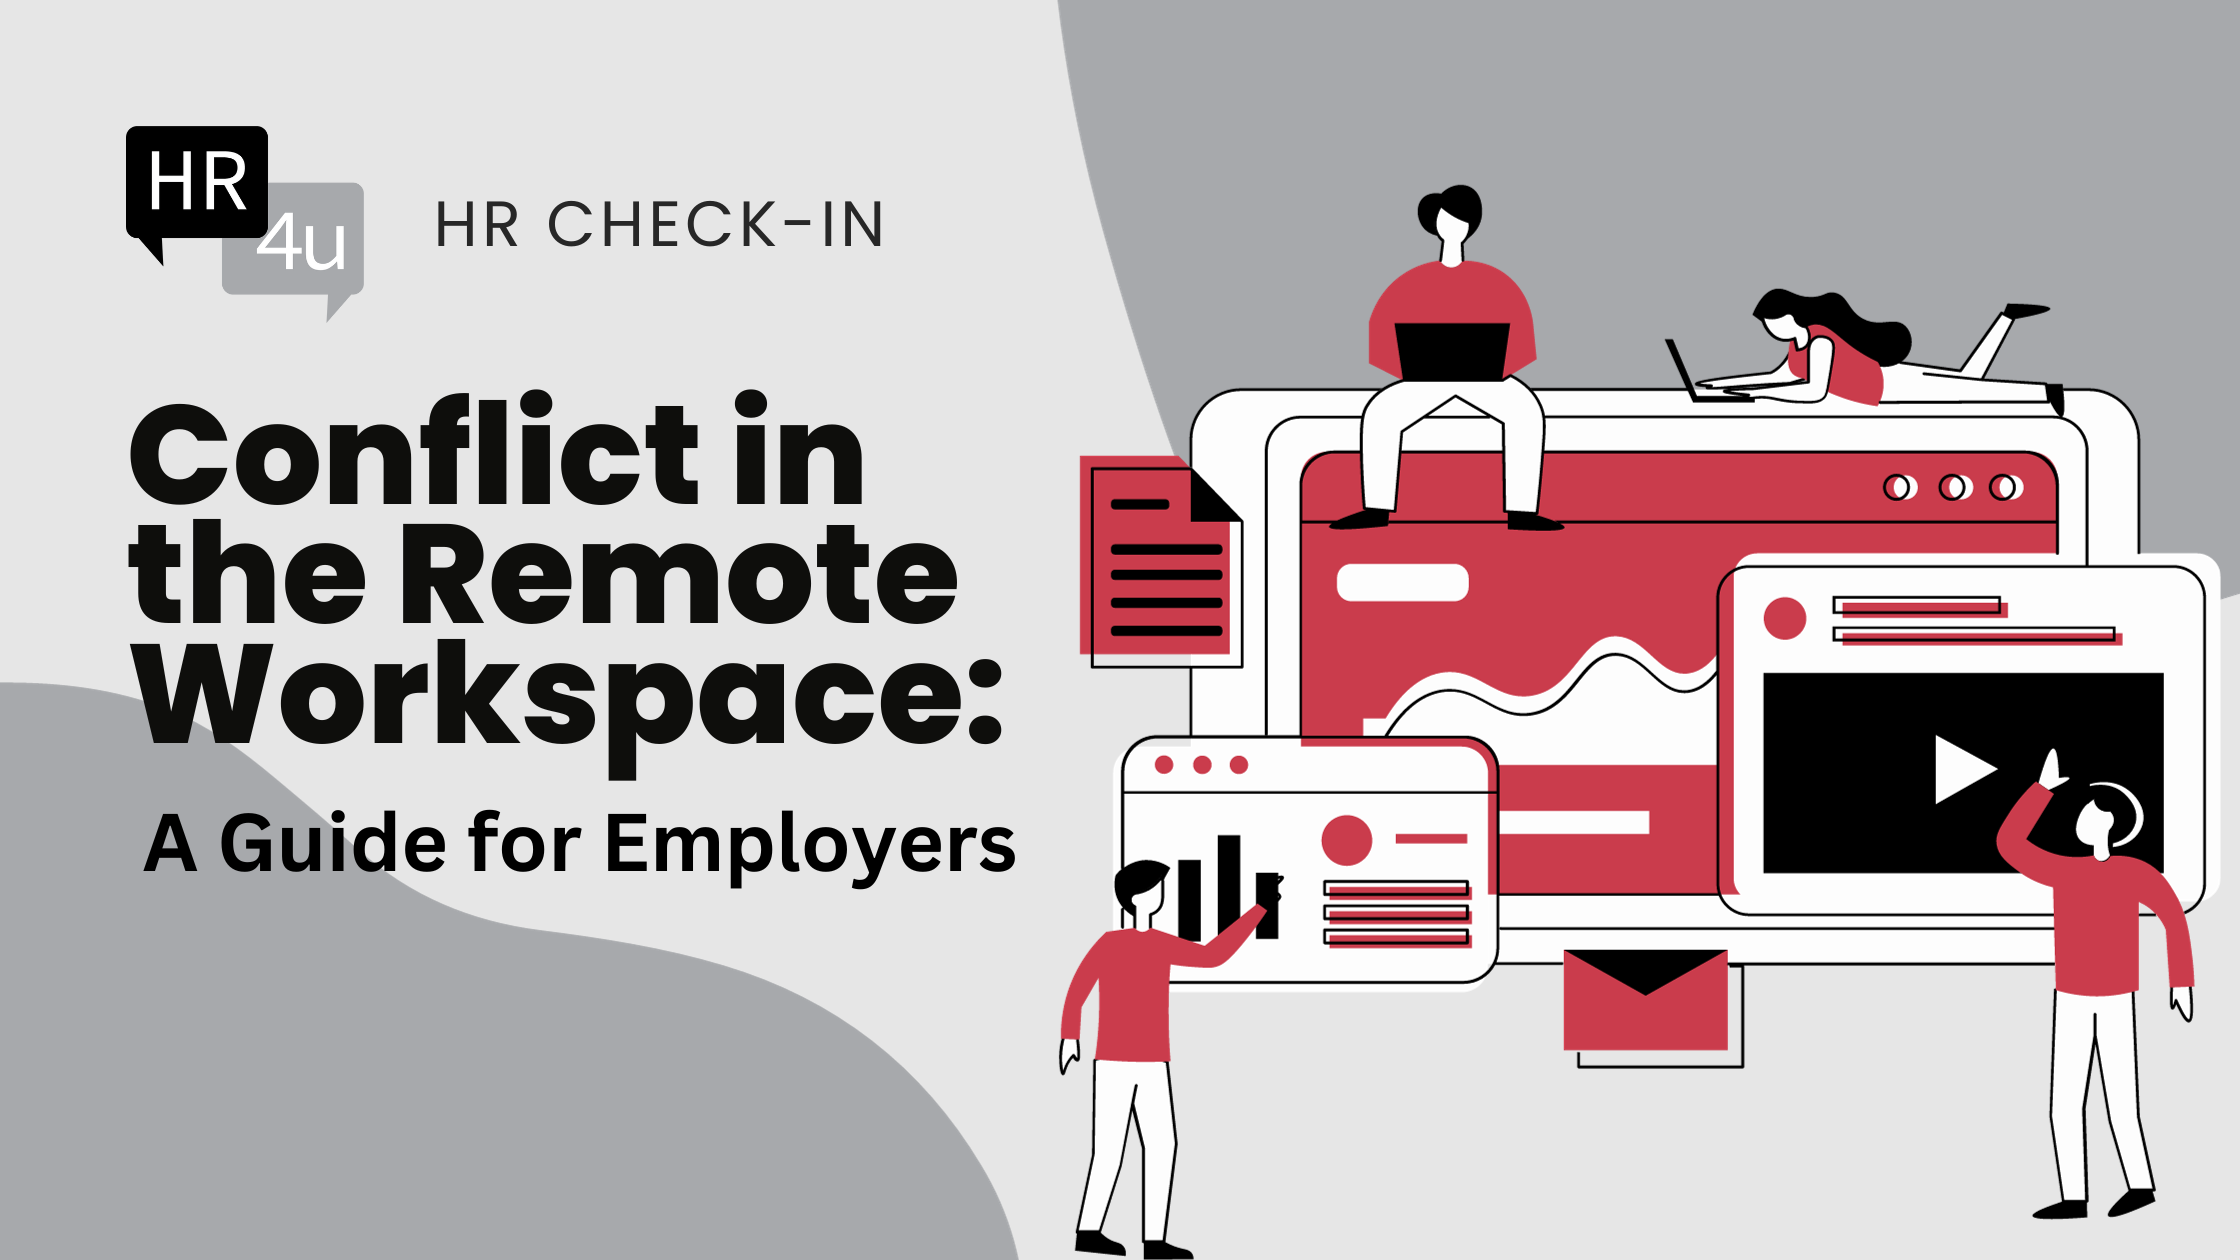 Conflict in the Remote Workspace: A Guide for Employers